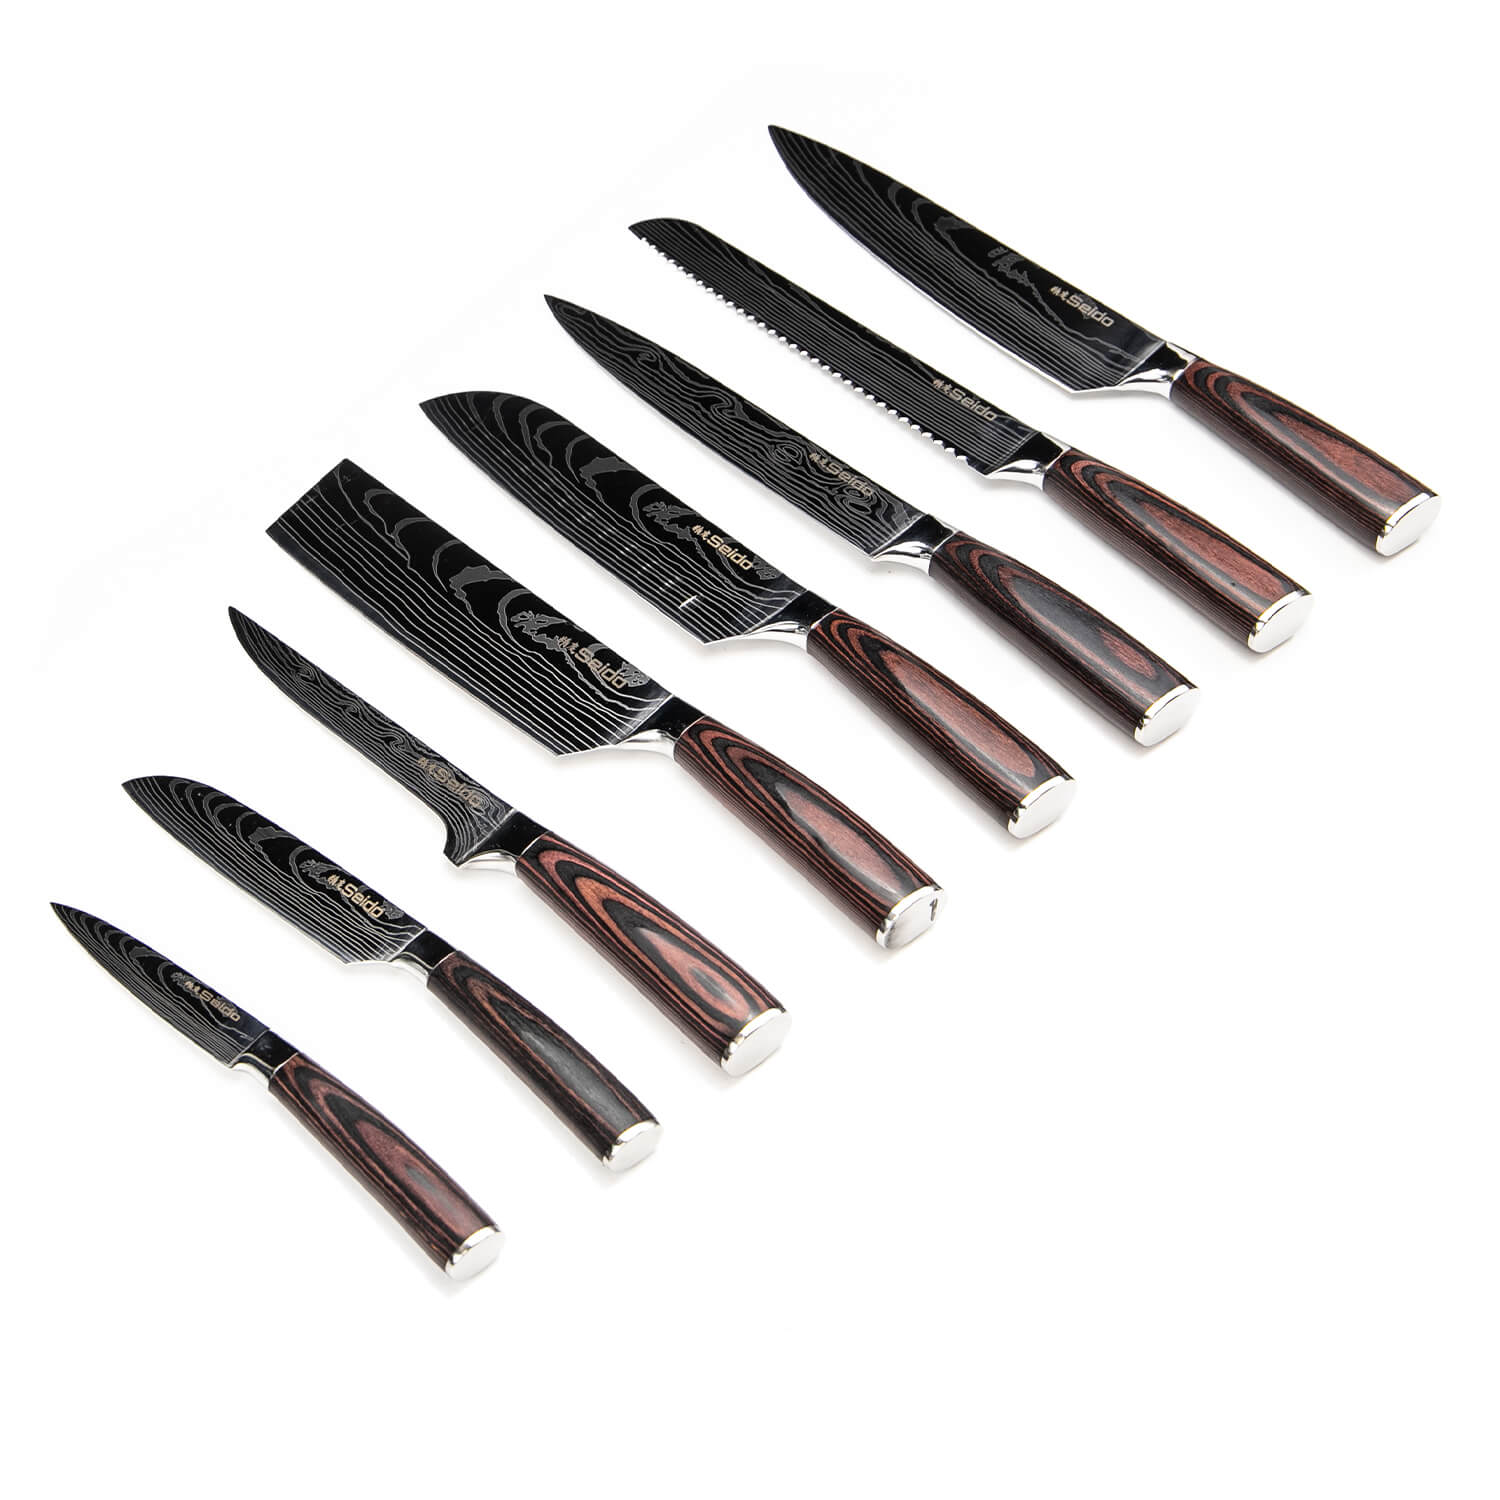 Seido™ Japanese Master Chef's 5-Piece Knife Set Deal with Gift Box